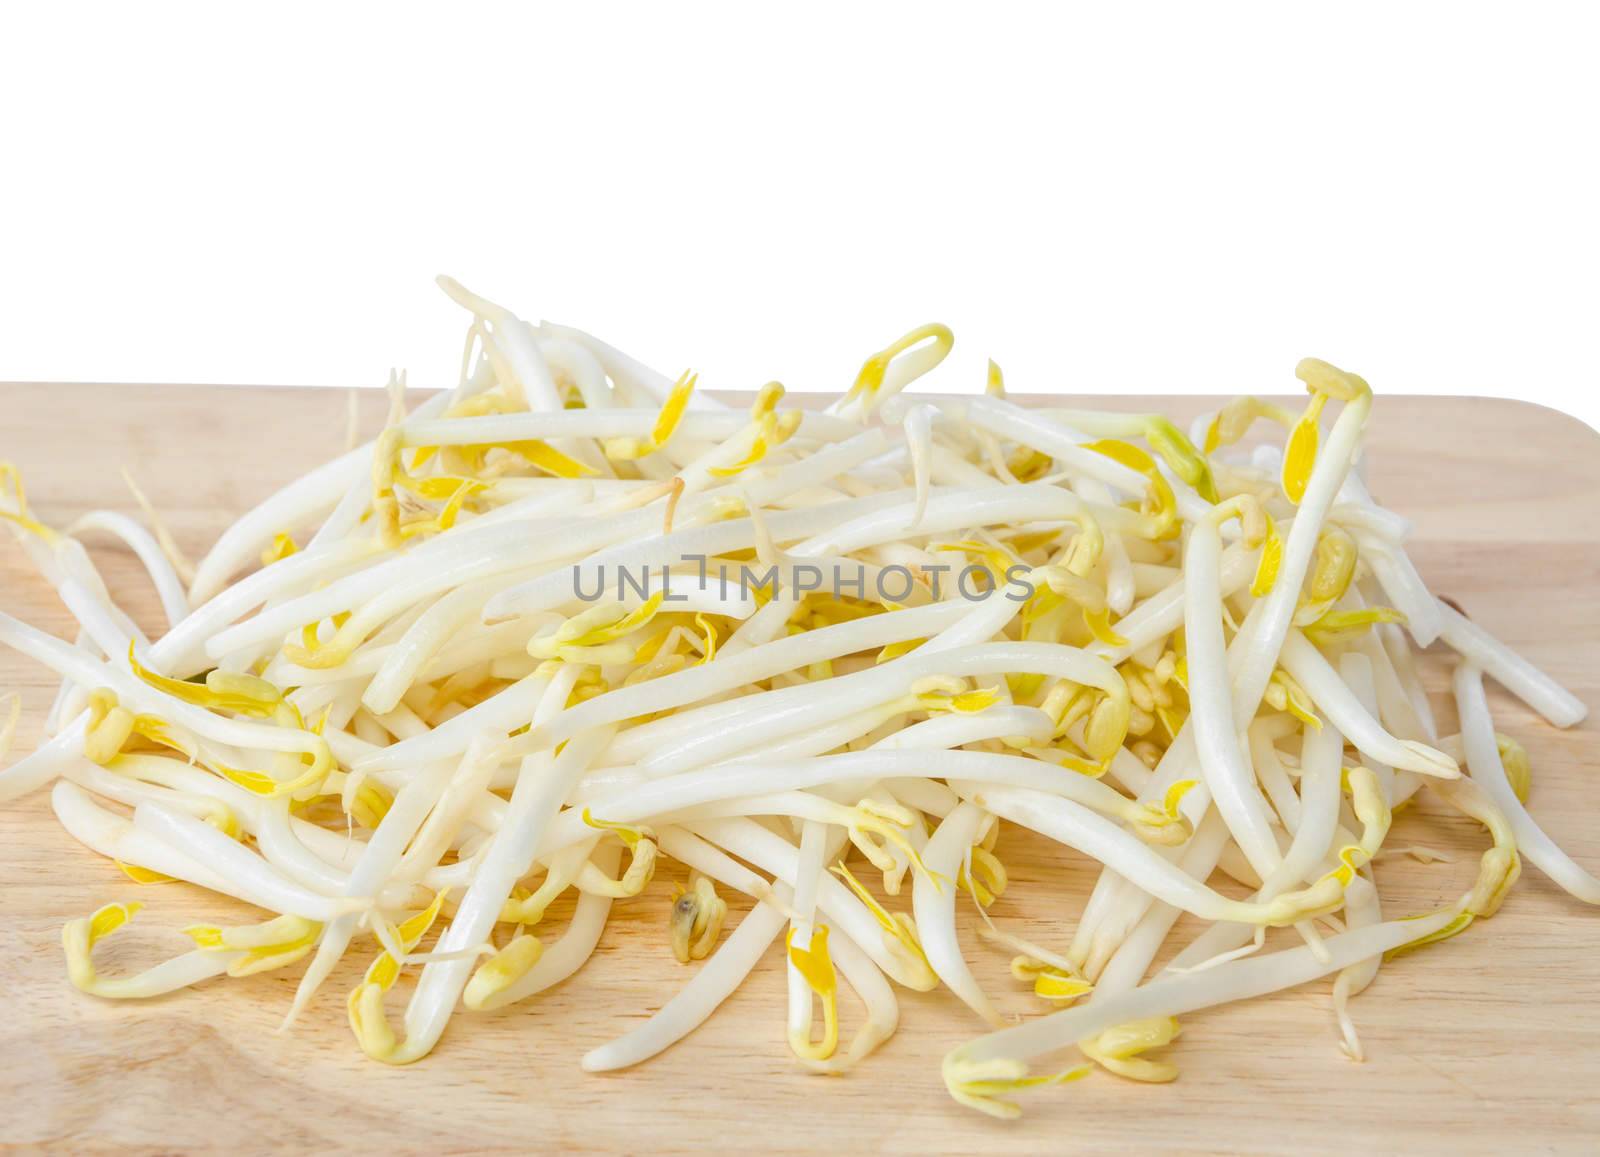 Mung bean sprouts in wooden dish on white background.